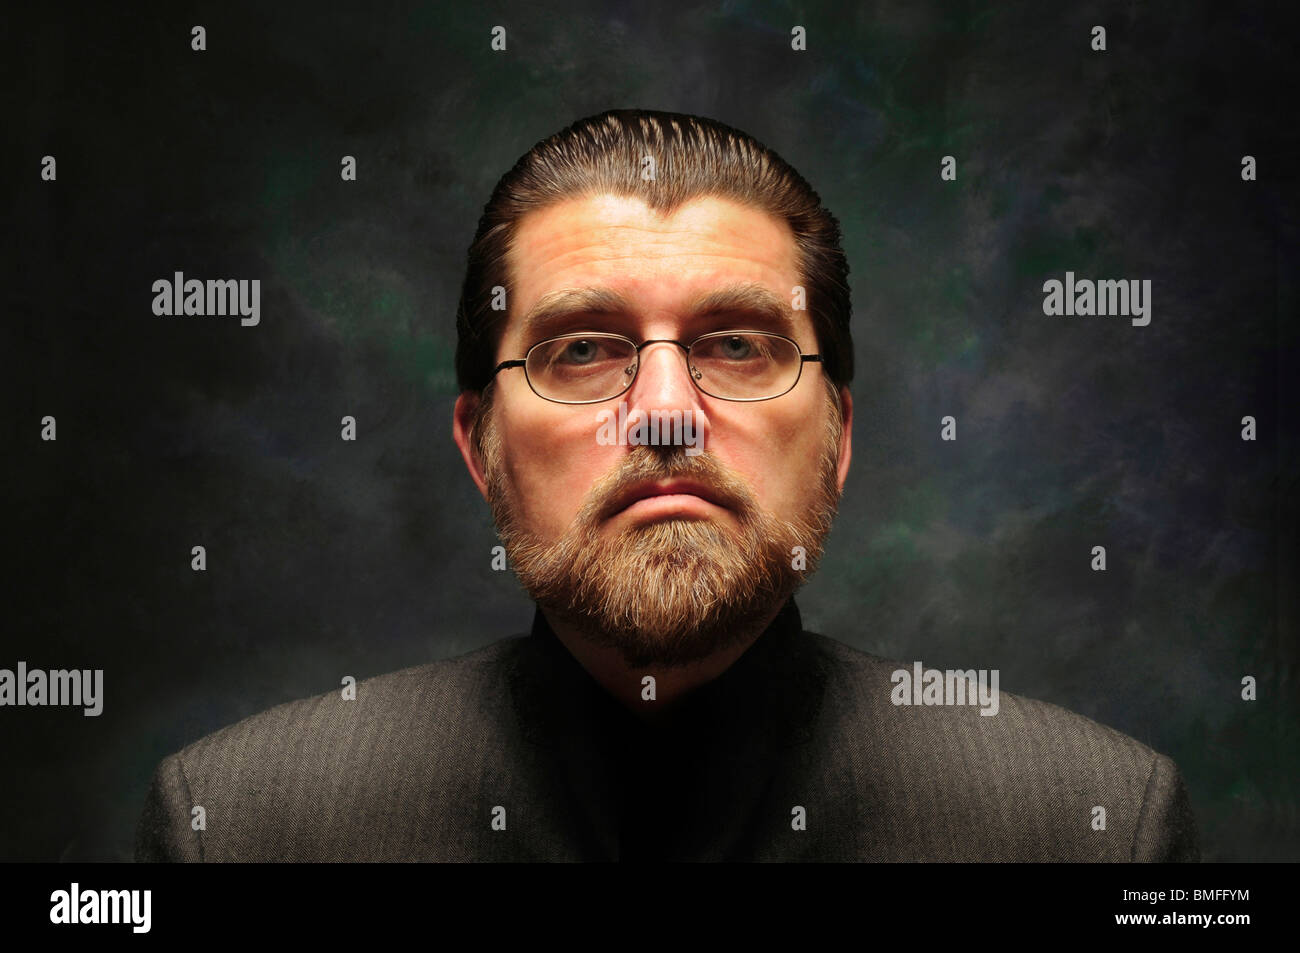 Orwellian character with glasses and beard against a dark mottled background Stock Photo